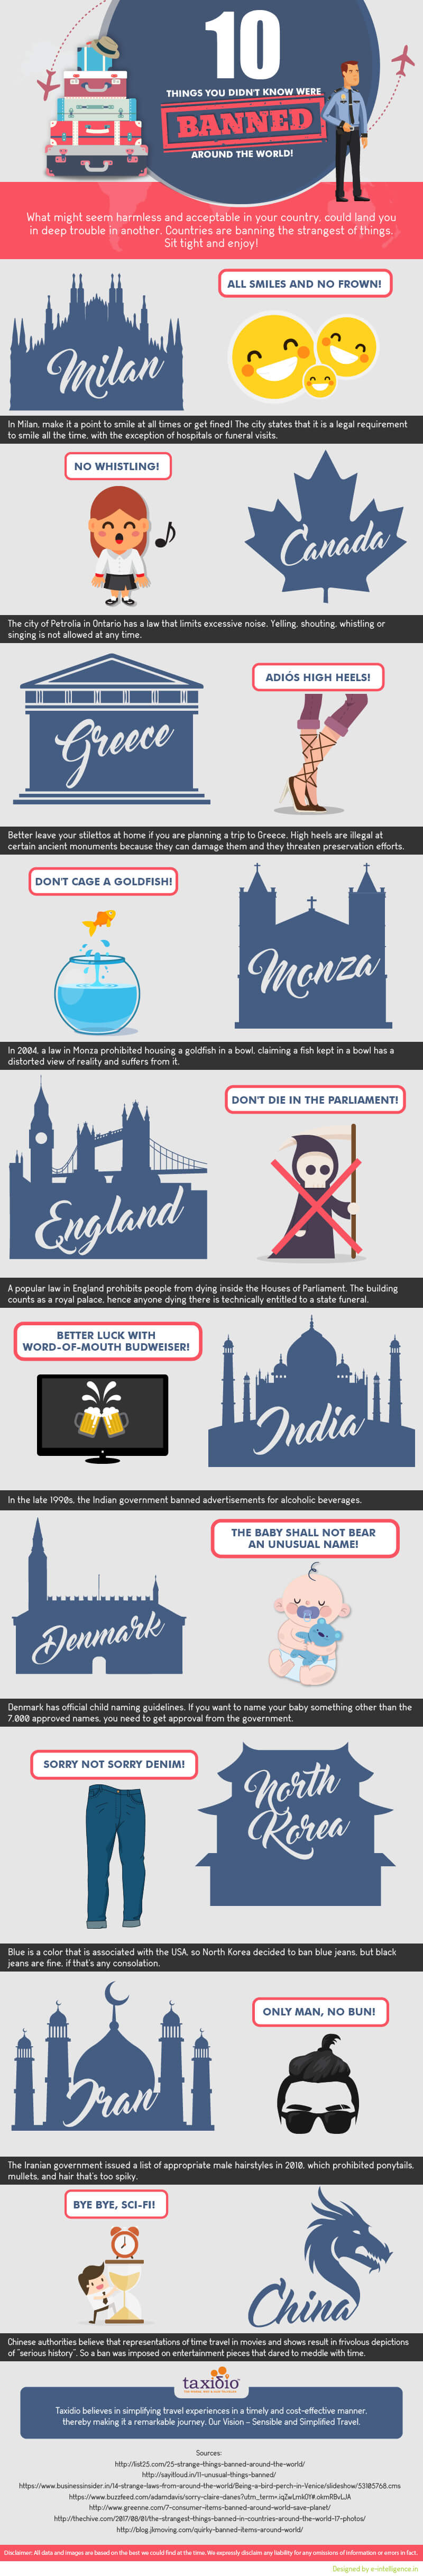 10-Things-You-Didn2019-Know-Were-Banned-Around-The-World-infographic-plaza